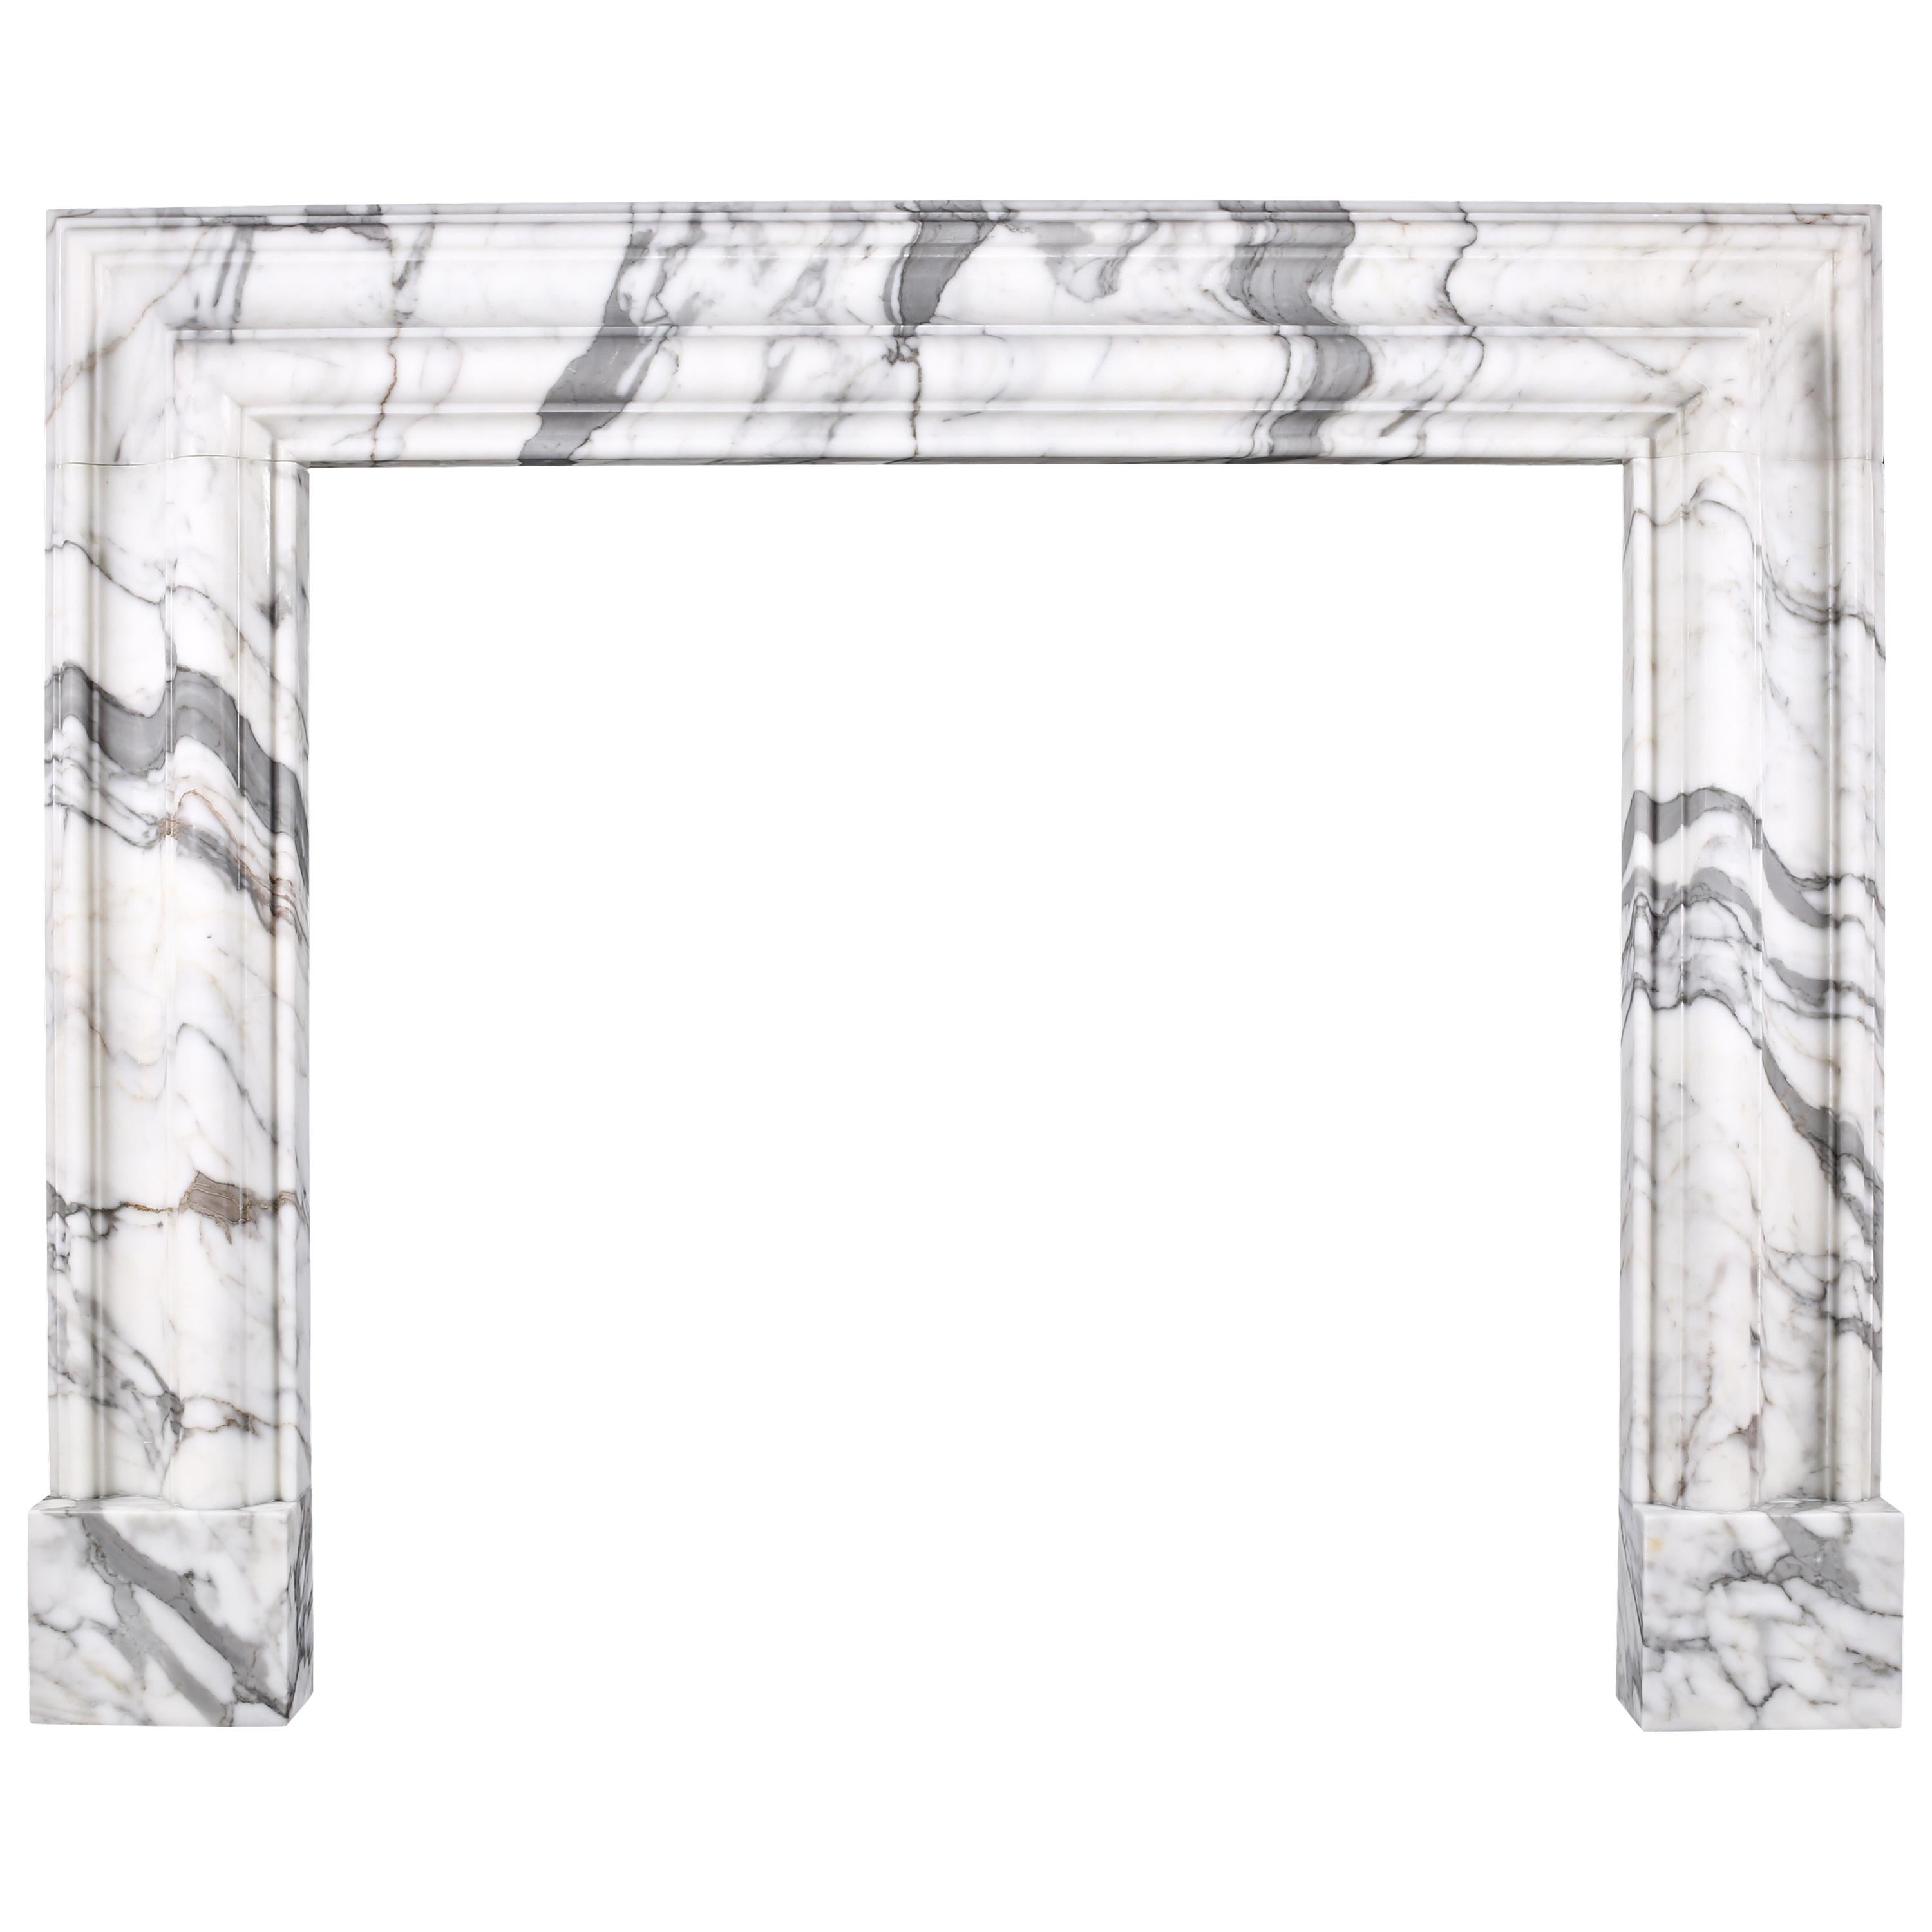 Baroque Bolection Fireplace Mantle in Italian White Statuary Marble 5 For Sale